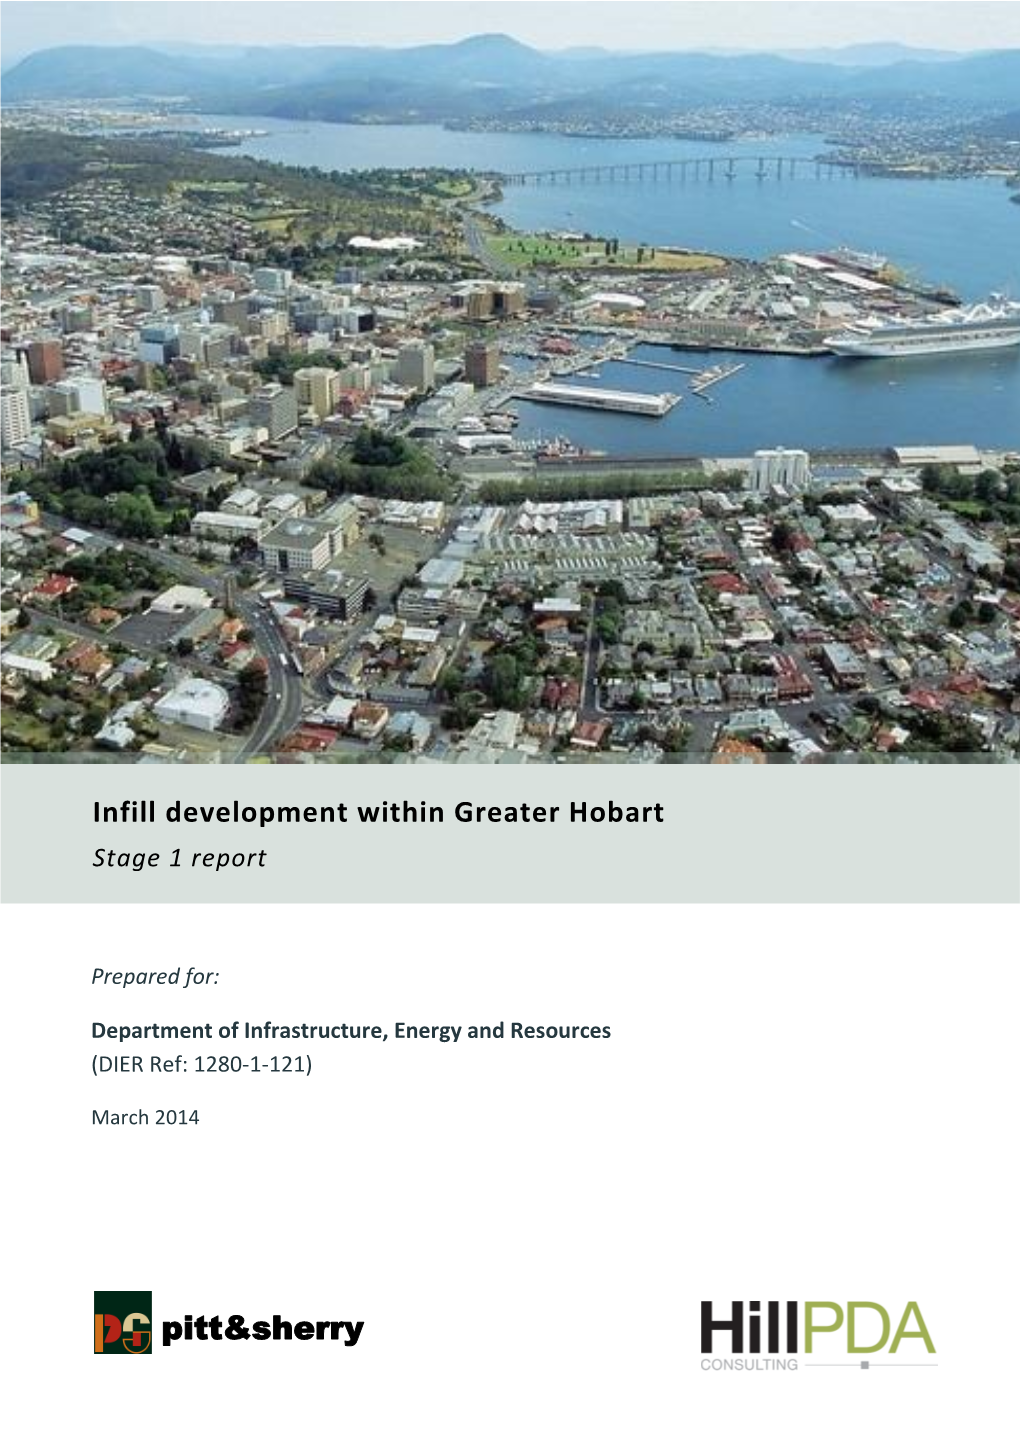 Infill Development Within Greater Hobart Stage 1 Report